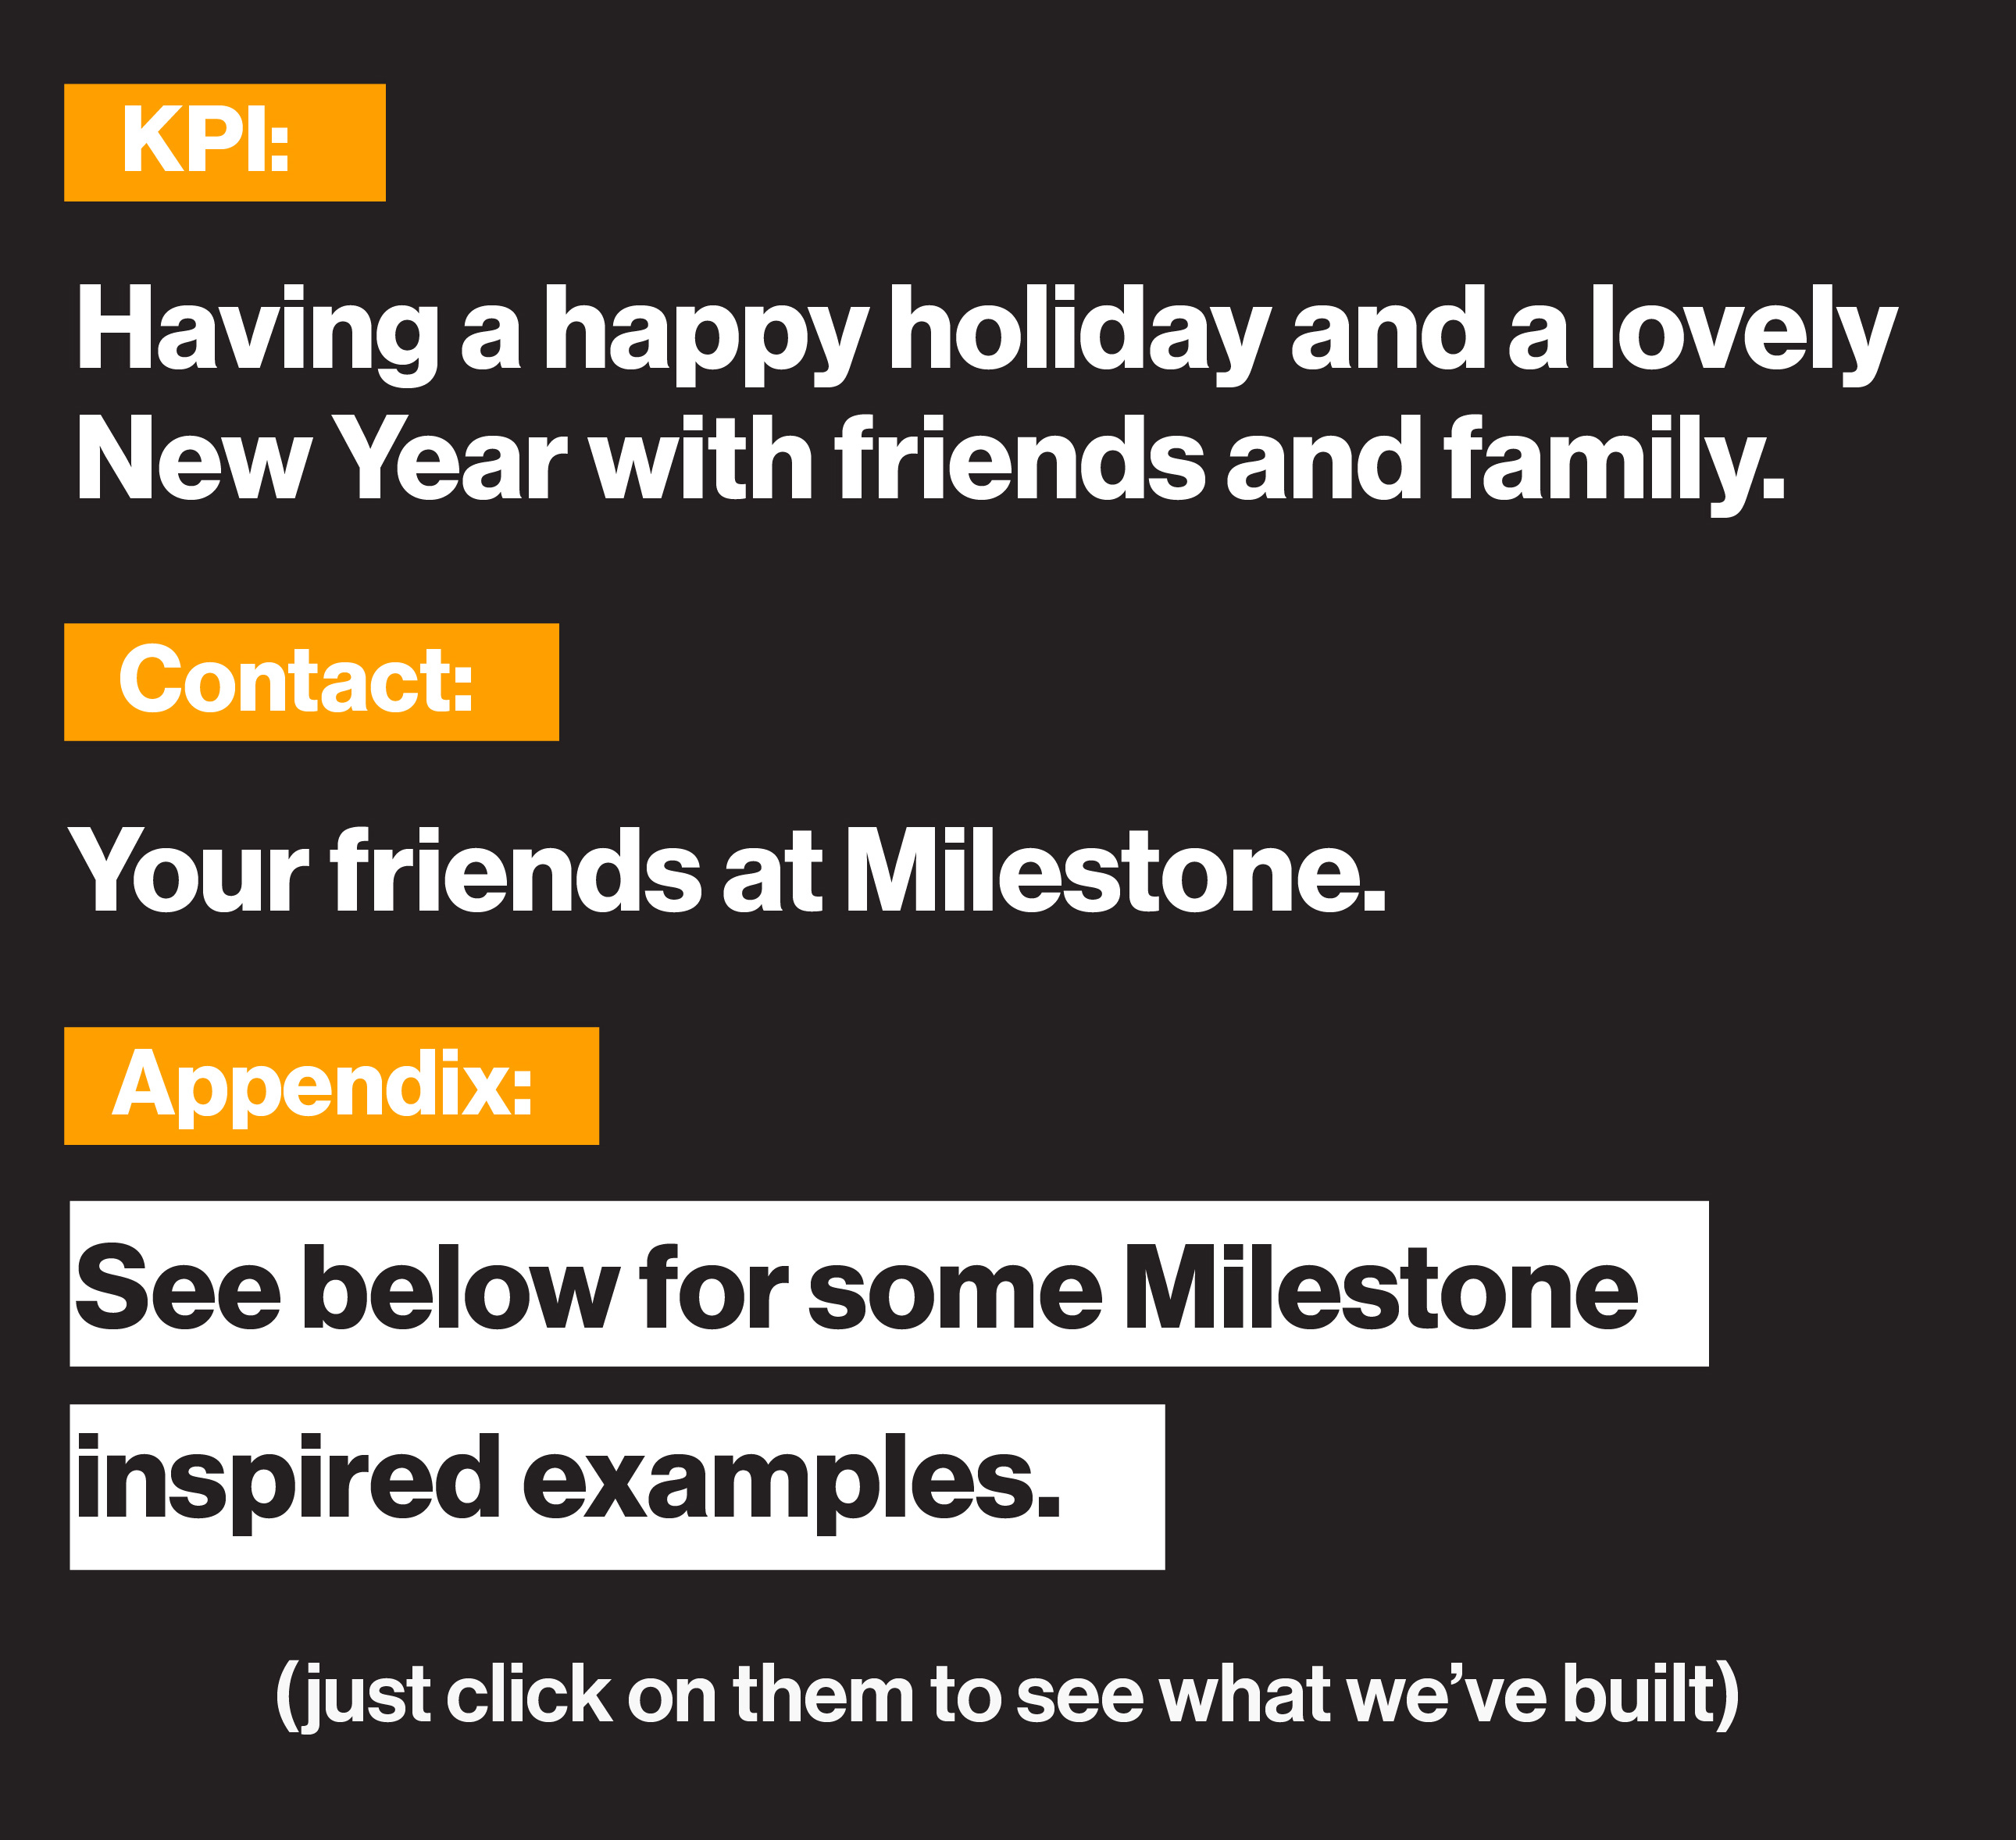 KPI: Having a happy holiday and a lovely New Year with friends and family. Contact: Your friends at Milestone. Appendix: See below for some Milestone inspired examples. Just click on them to see what we've built